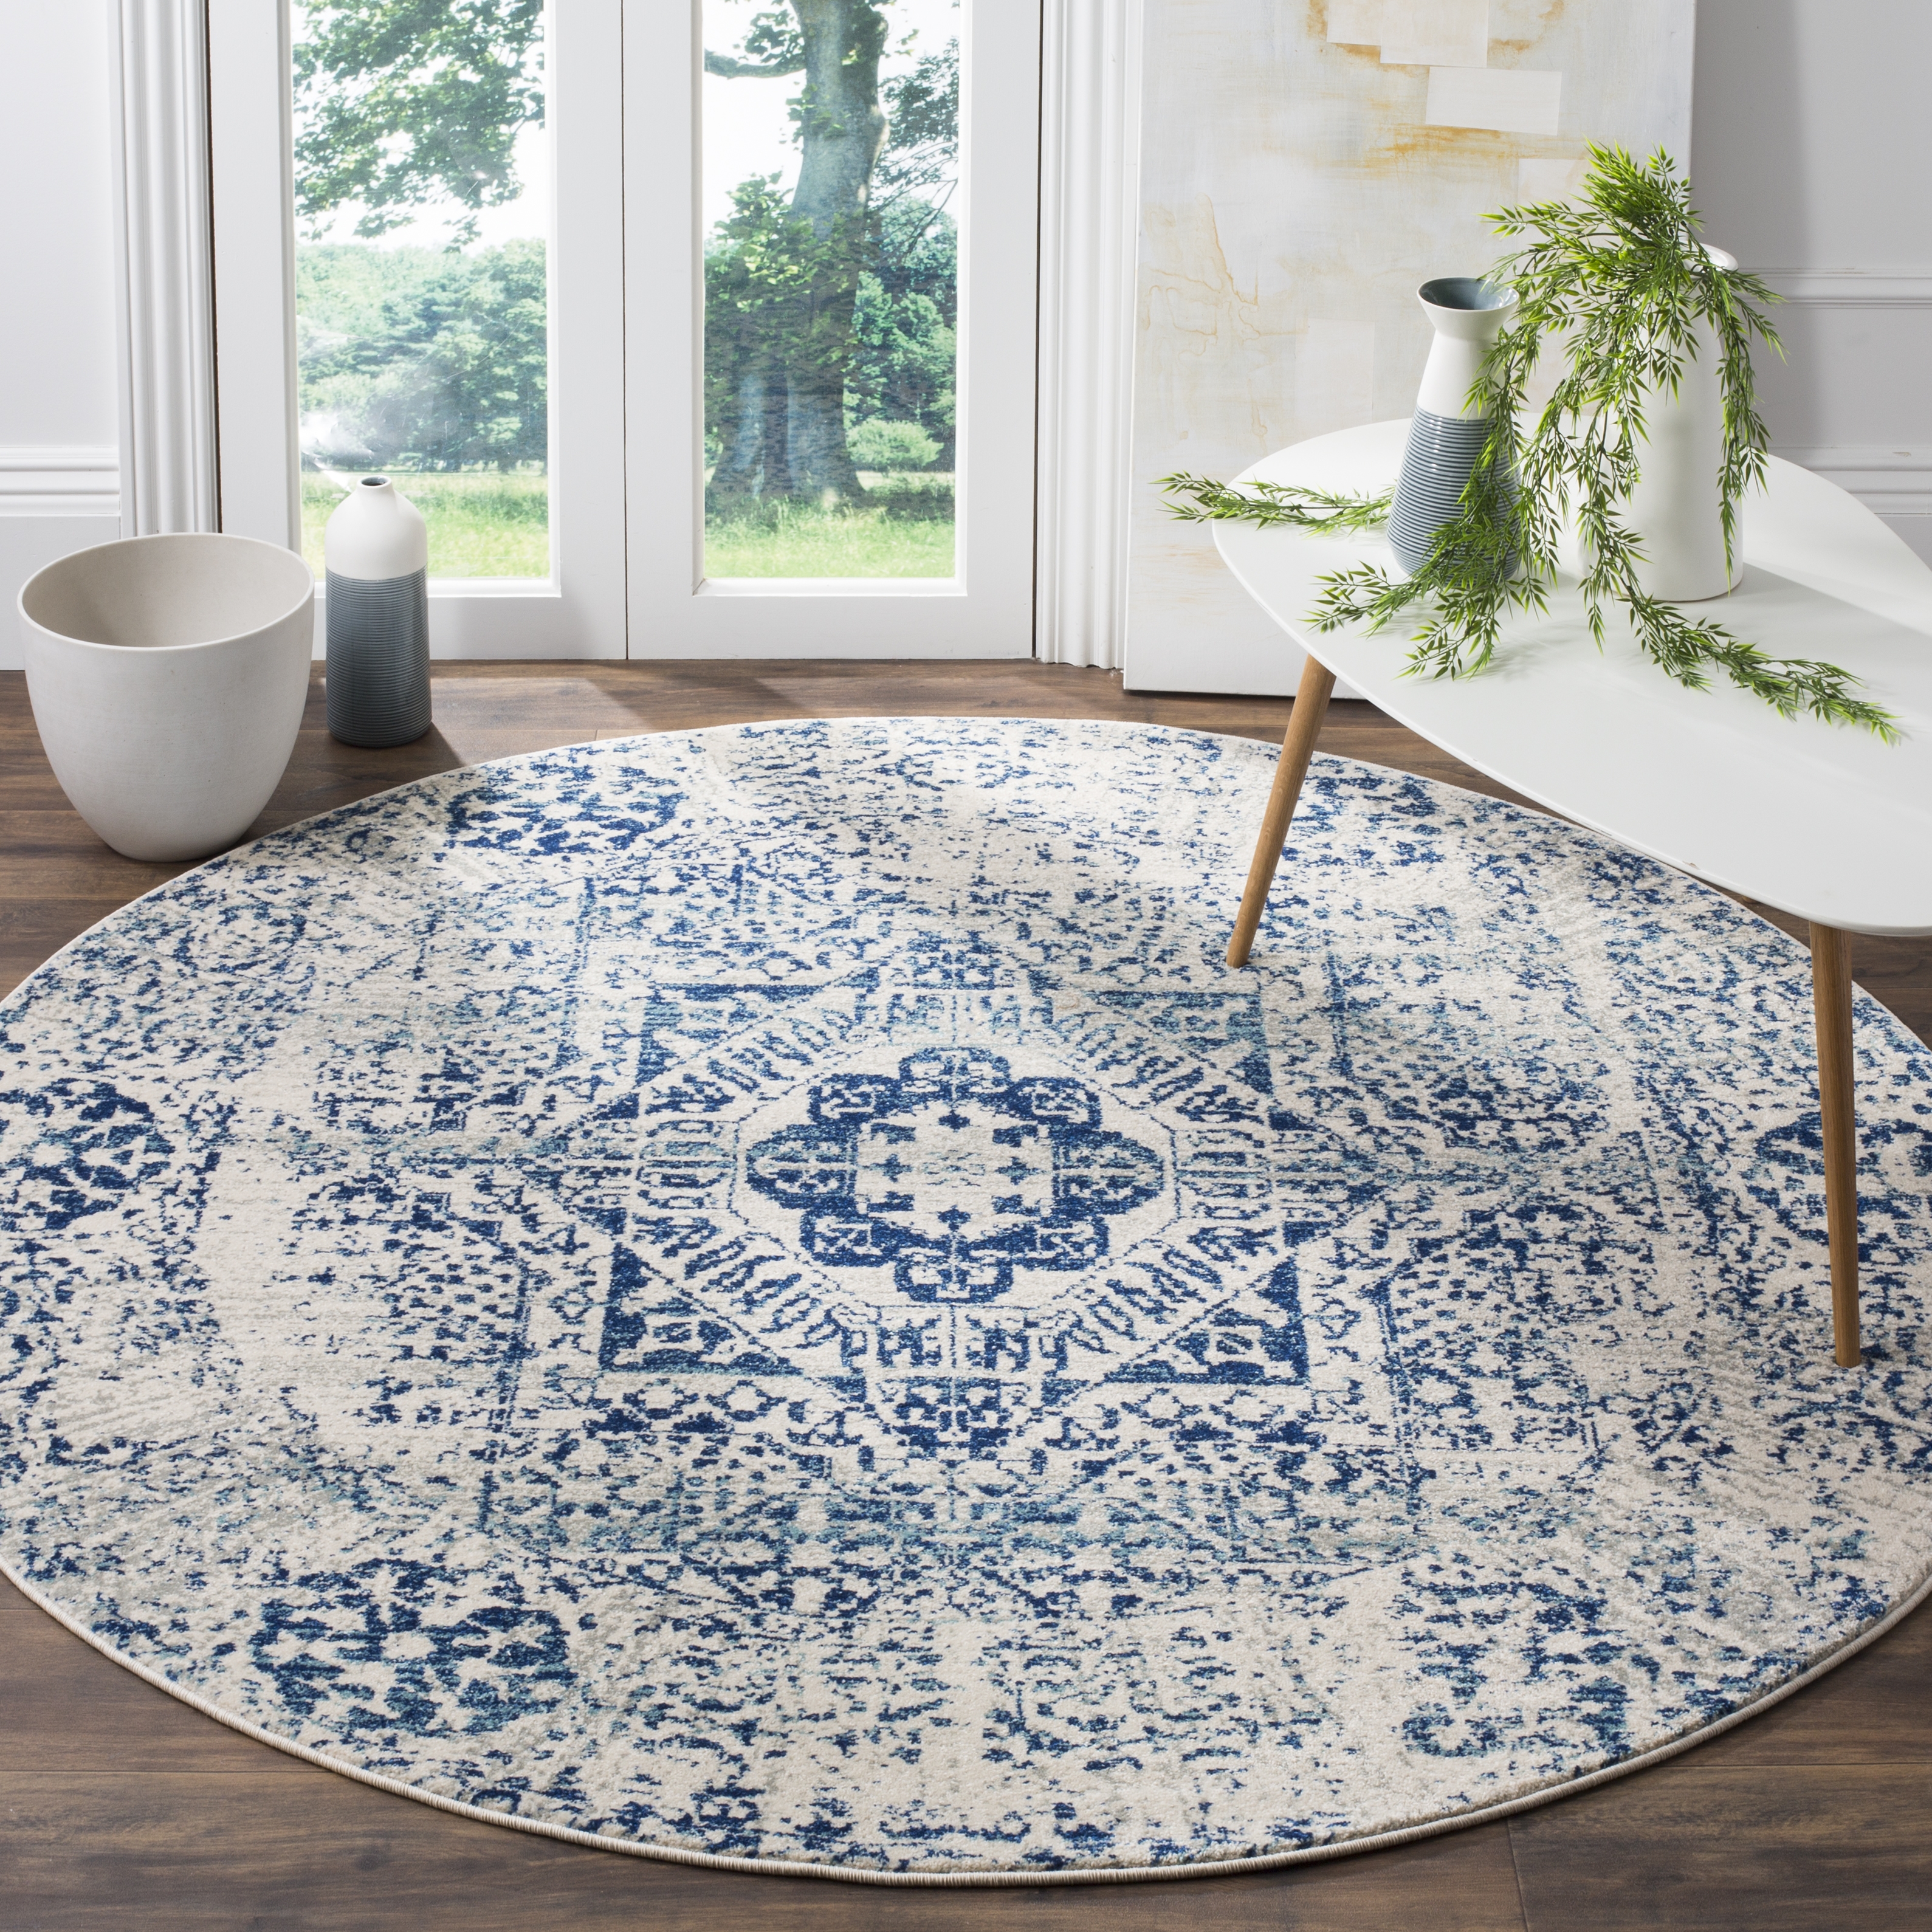 Arlo Home Woven Area Rug, EVK260C, Ivory/Blue,  6' 7" X 6' 7" Round - Image 1